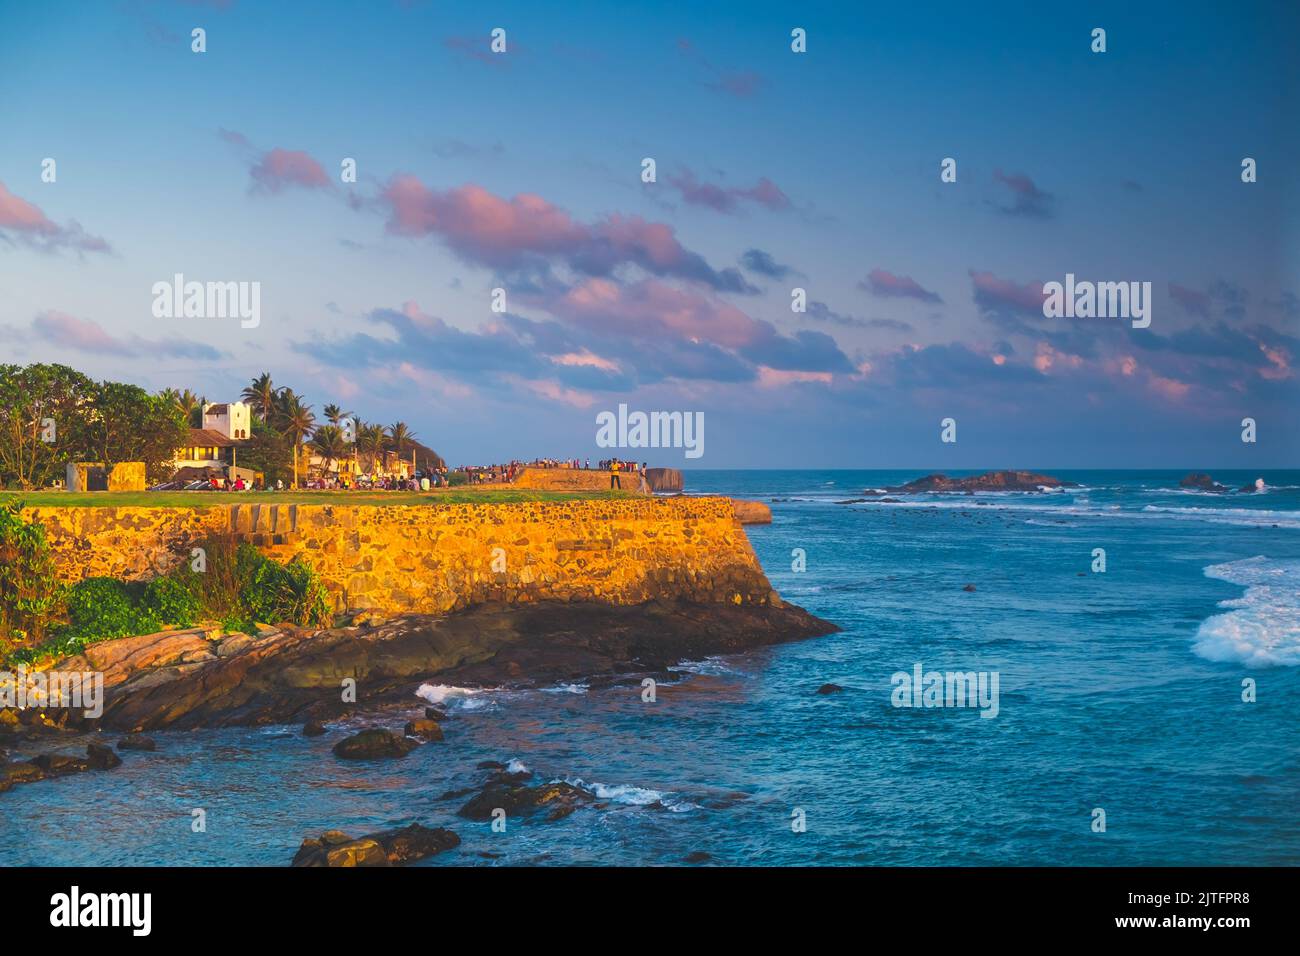 Galle Fort panorama with old walls in sunset orange light against blue sky with pink clouds, ocean in background. Largest city fortress and port of Sri Lanka - popular tourist destination. Stock Photo